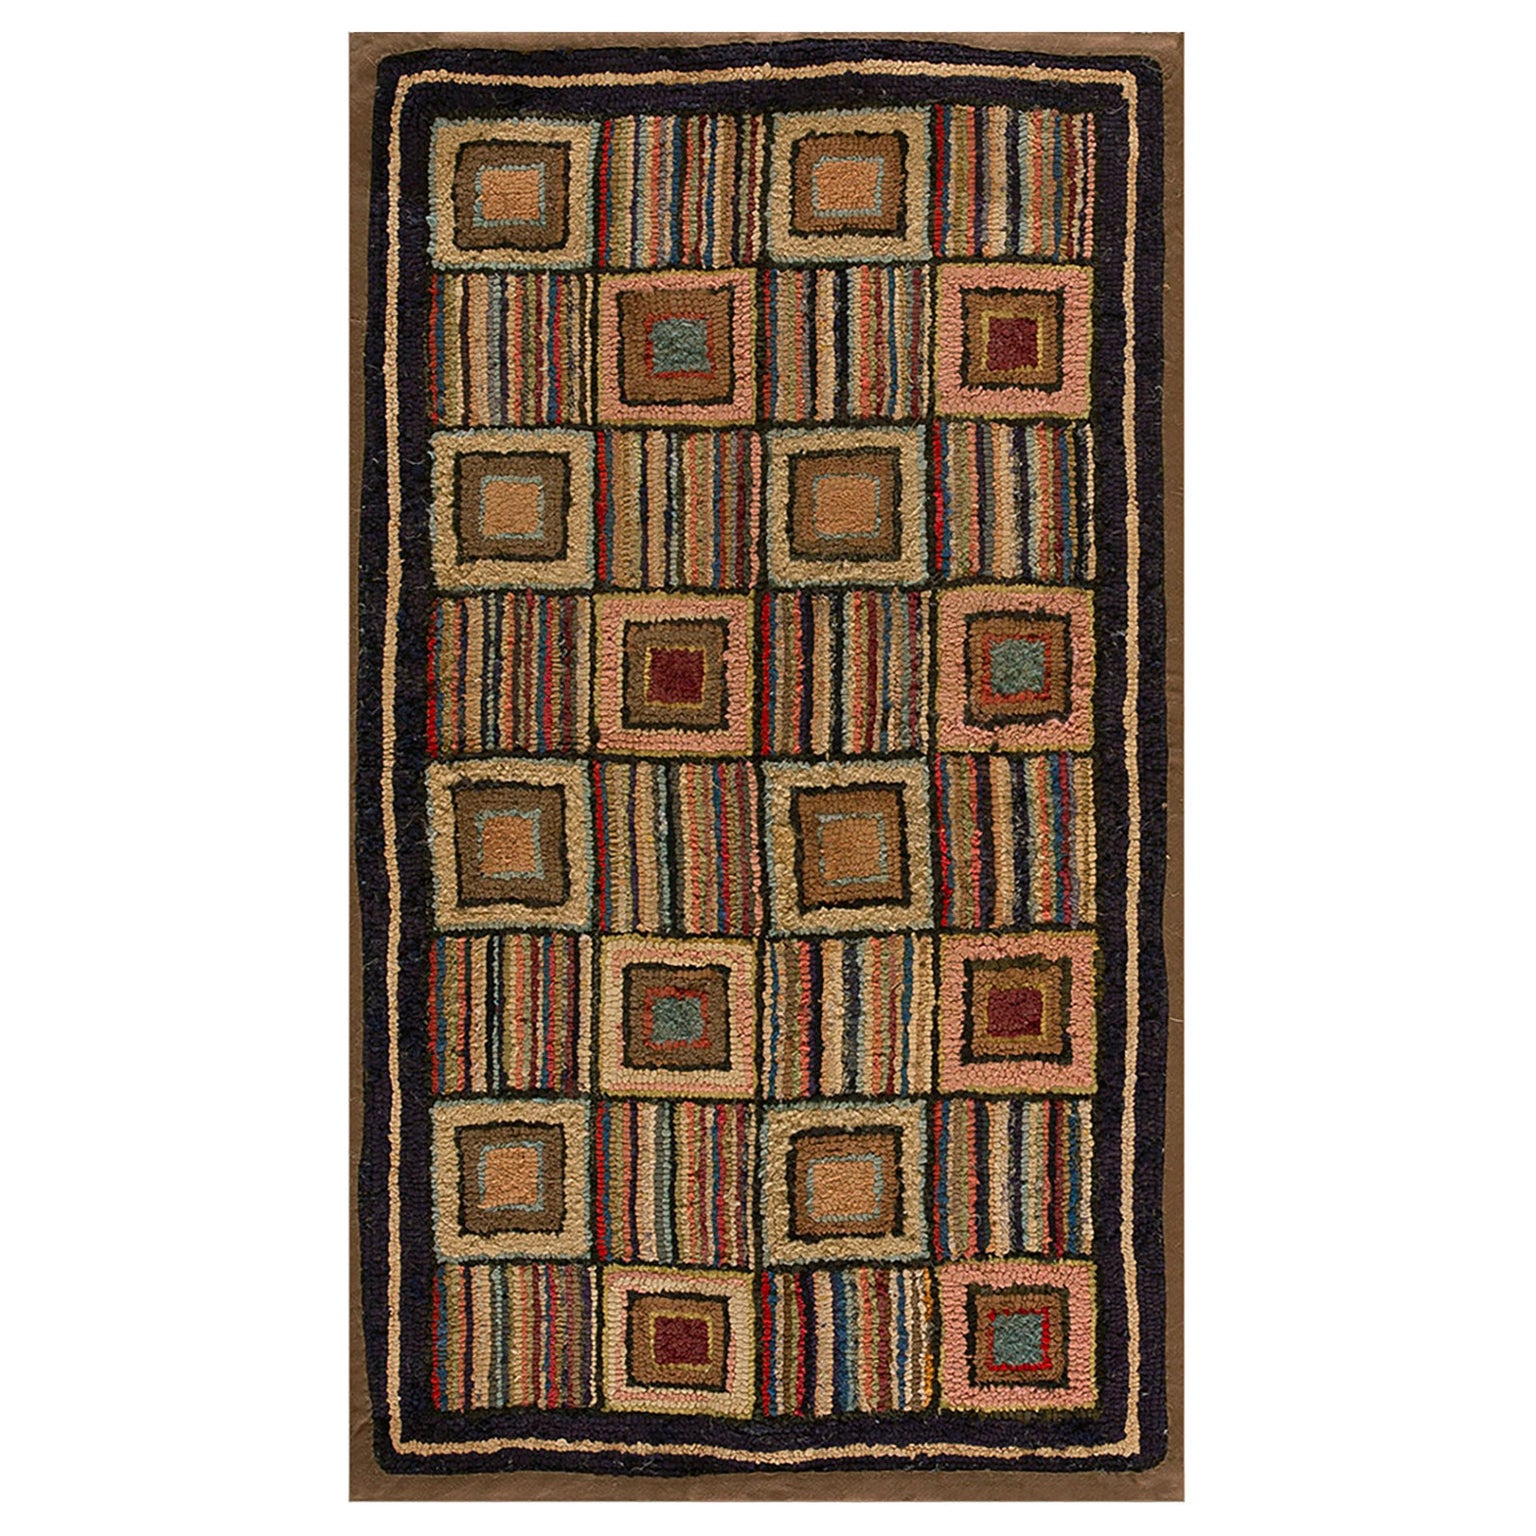 1930s Geometrical American Hooked Rug ( 2' x 3'5" - 62 x 104 ) For Sale